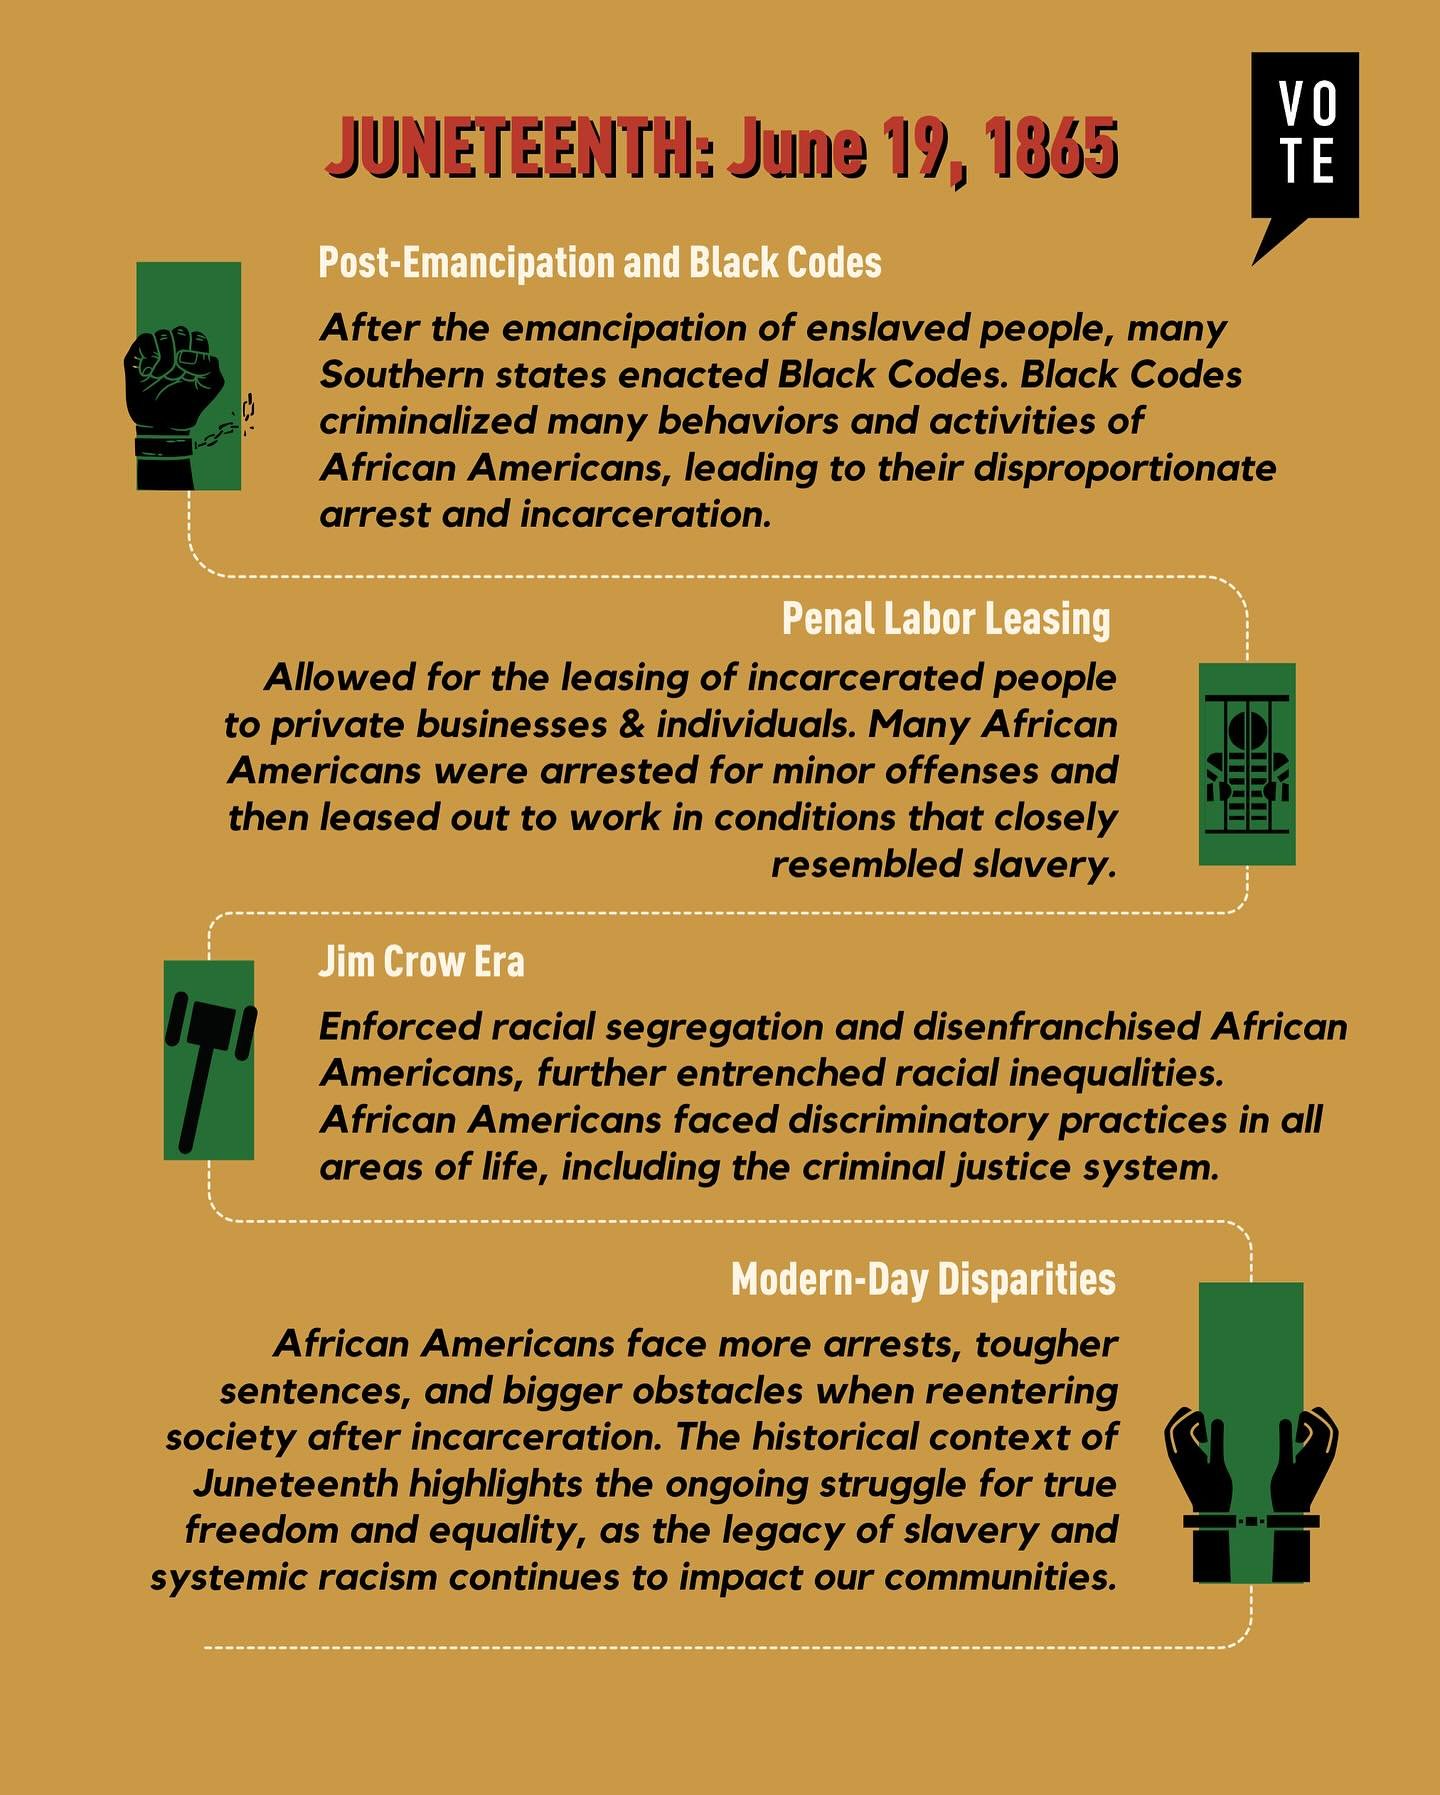 Honoring #juneteenth : From Black Codes to Jim Crow, the fight for true freedom and equality continues. Today we remember the past, tomorrow we work towards a better future. 🖤✊🏿

P.S. Don't forget to join us this evening at 5:30 pm for our Juneteen